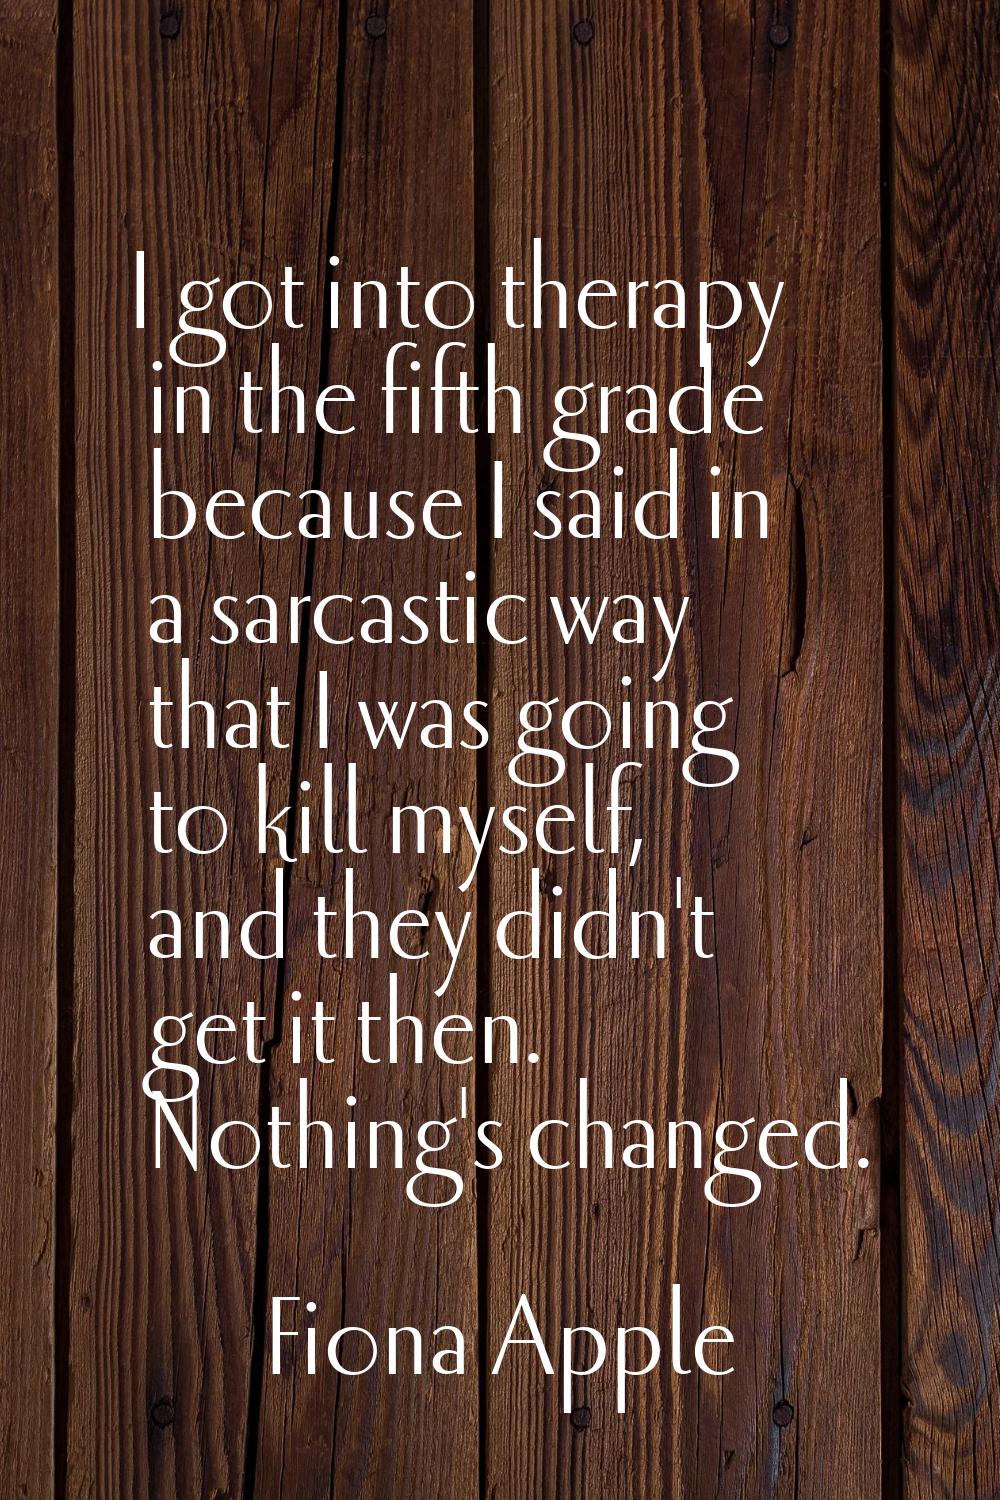 I got into therapy in the fifth grade because I said in a sarcastic way that I was going to kill my